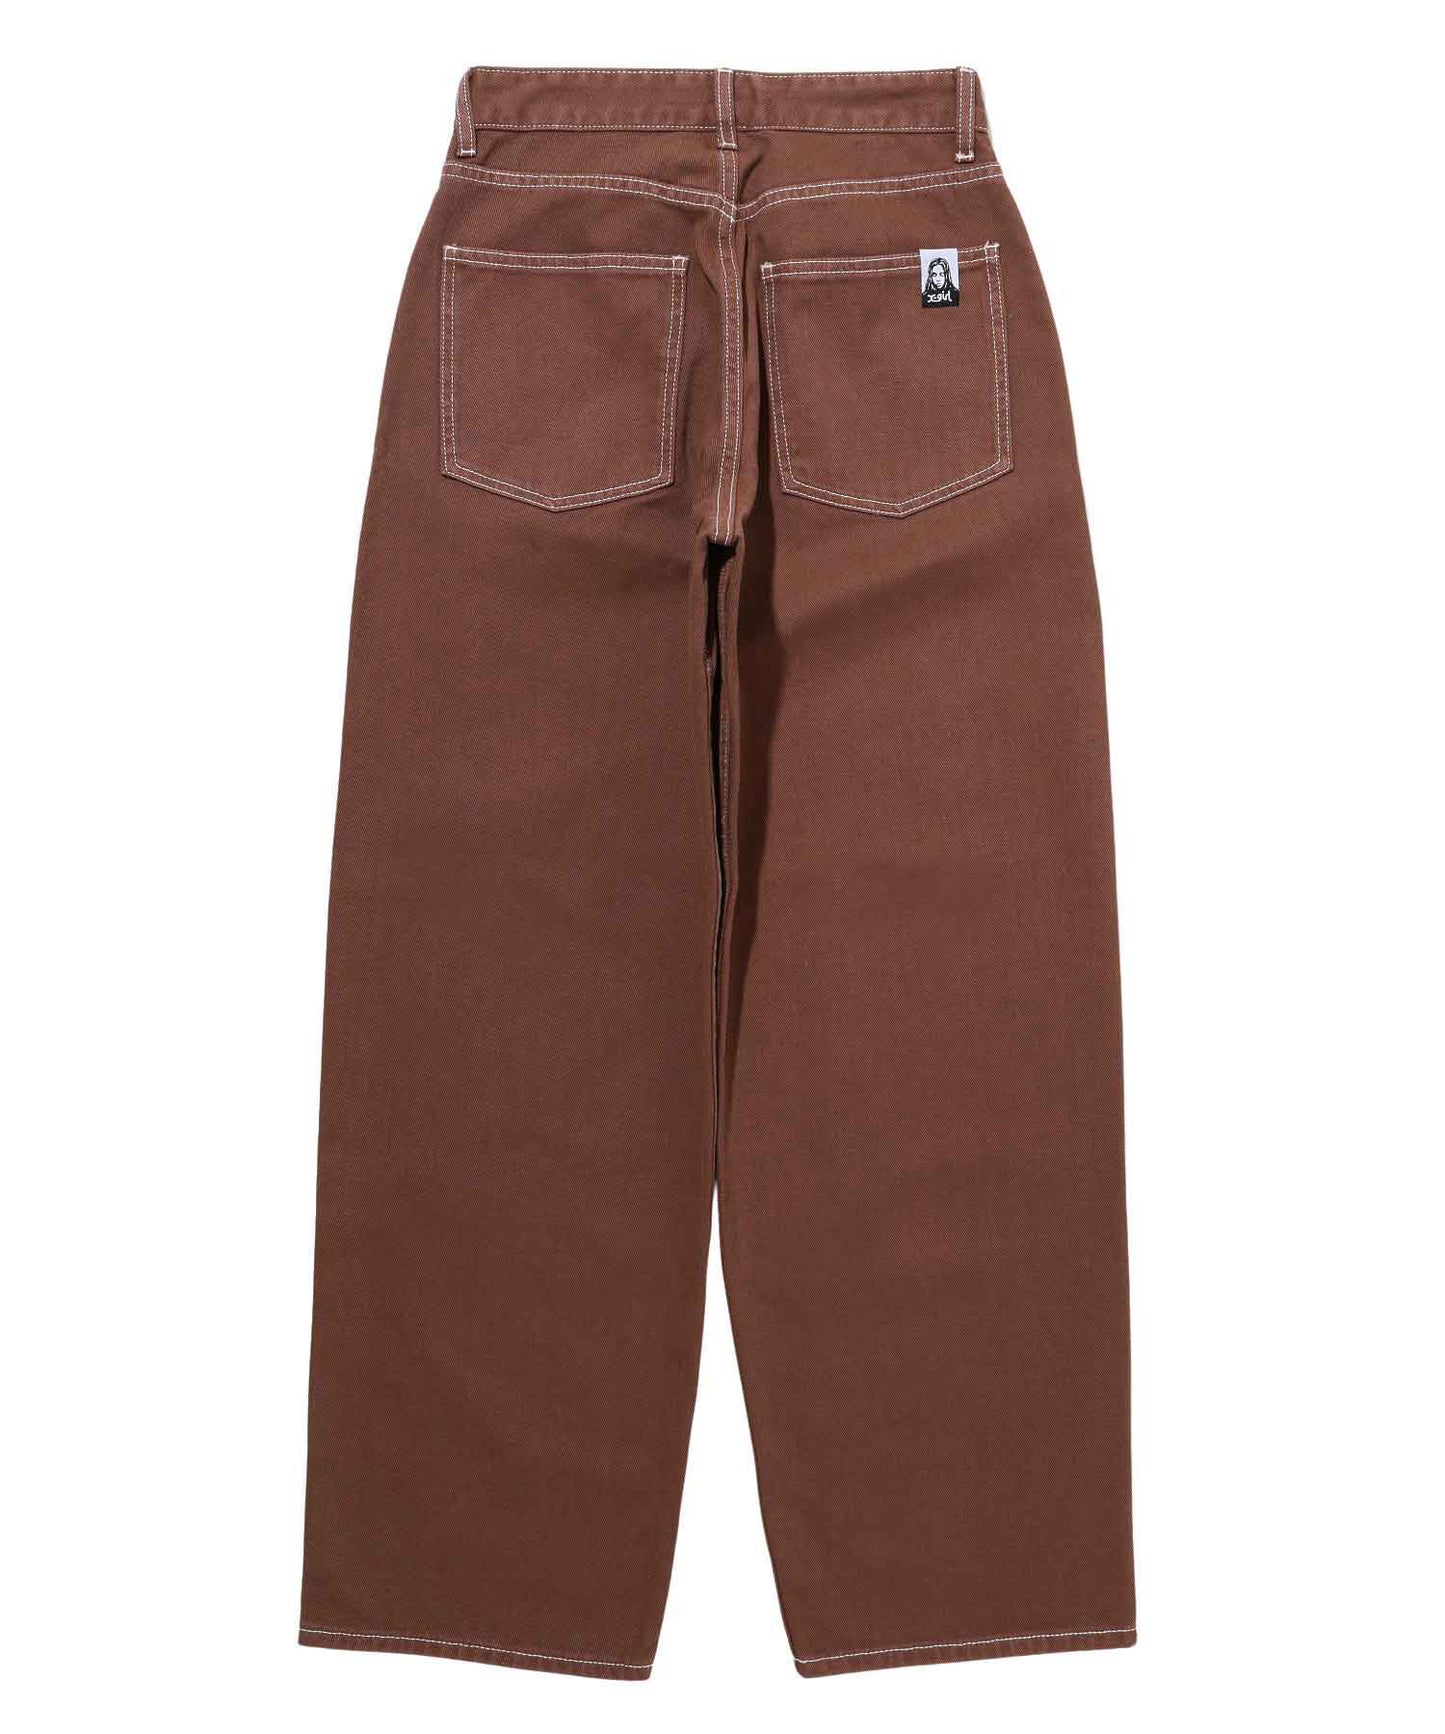 WIDE TAPERED PANTS